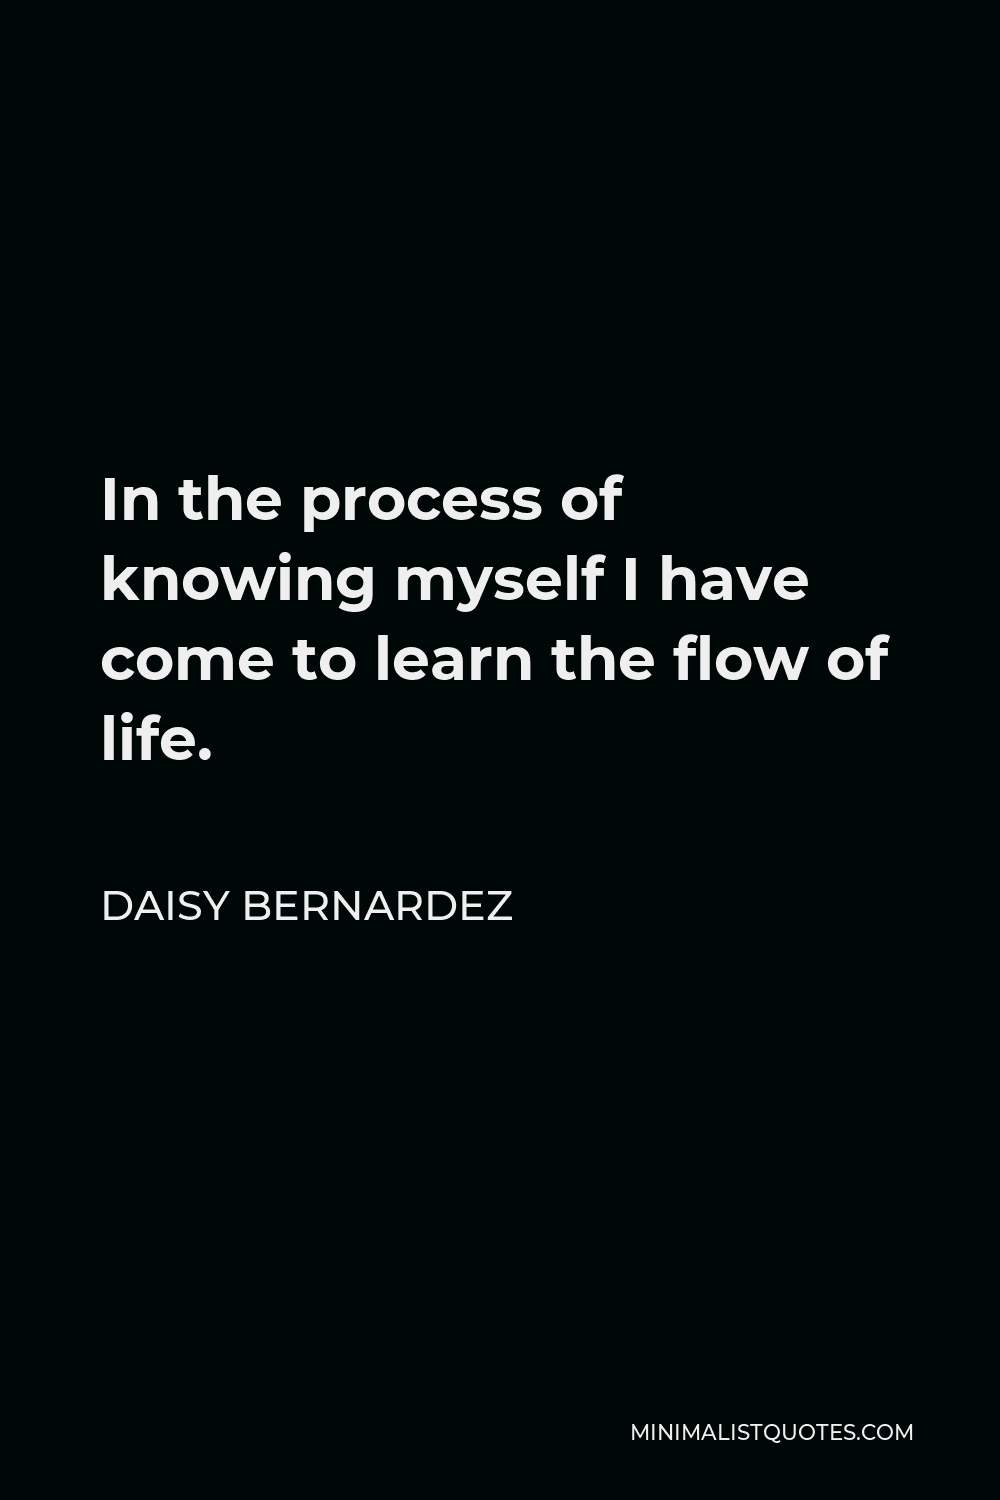 Daisy Bernardez Quote - In the process of knowing myself I have come to learn the flow of life.